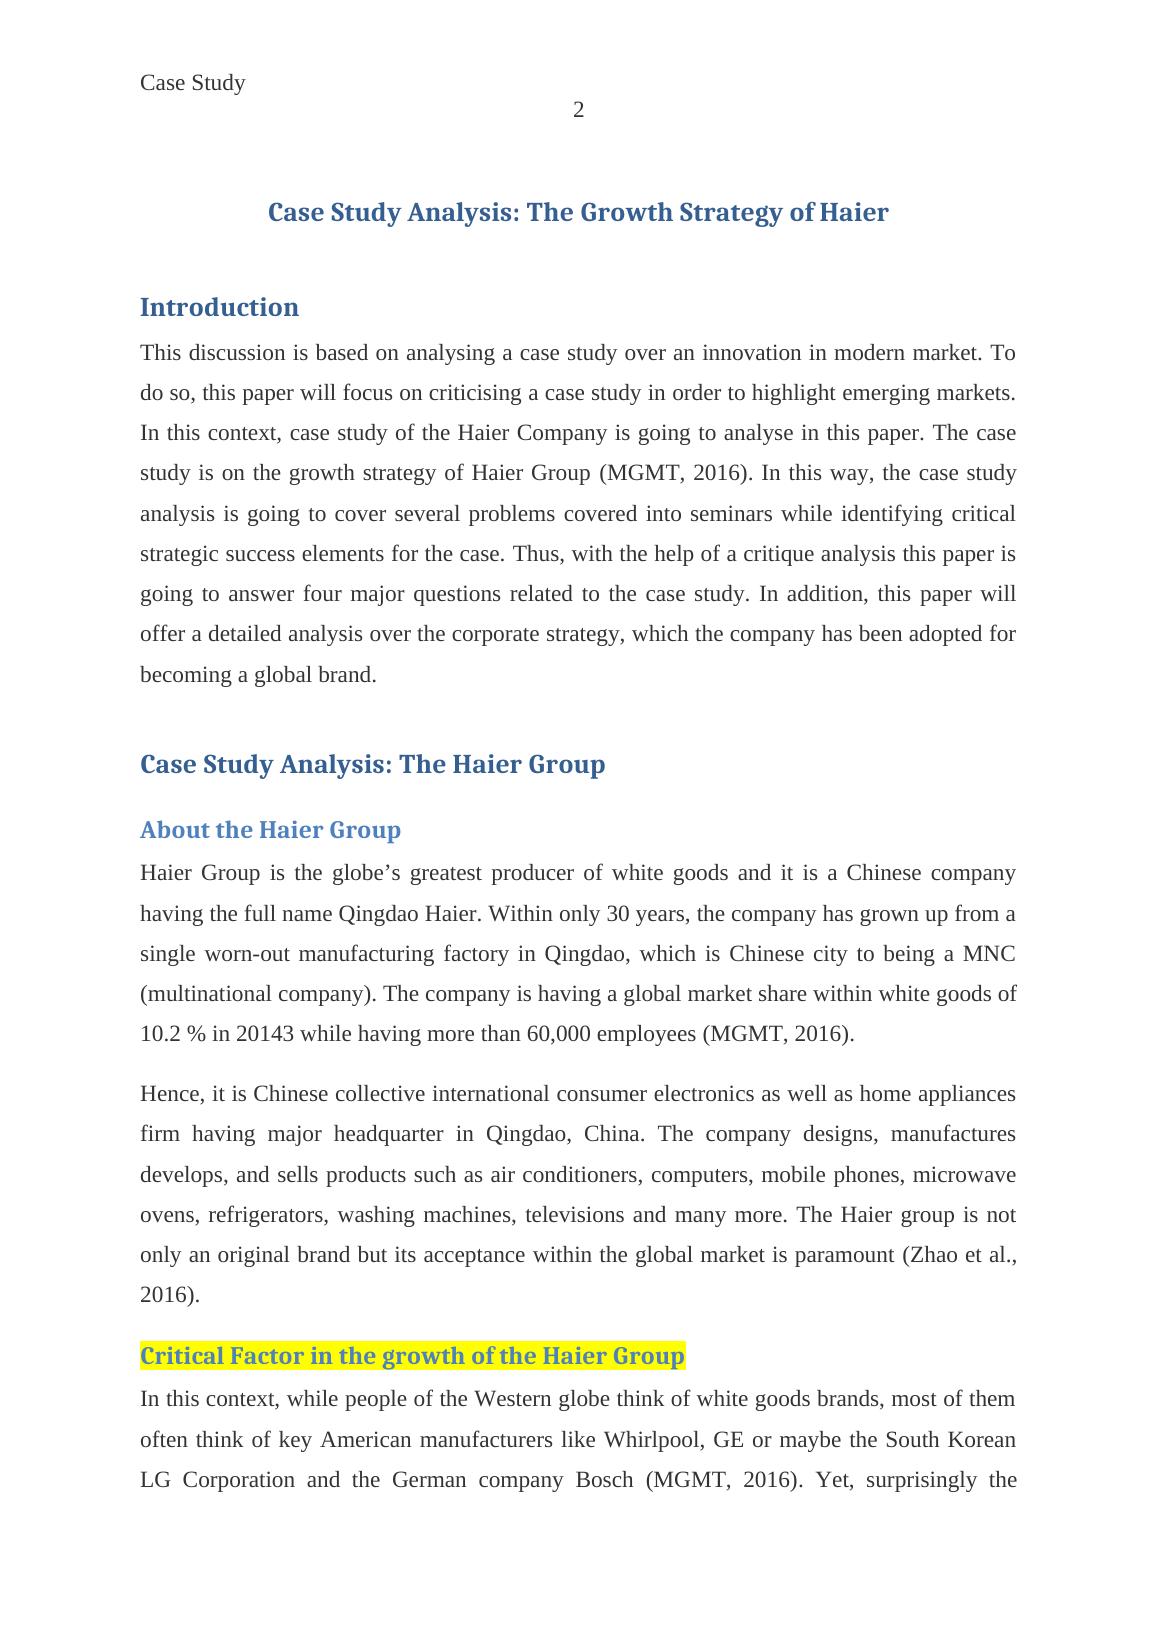 Case Study Analysis: The Growth Strategy of Haier_3